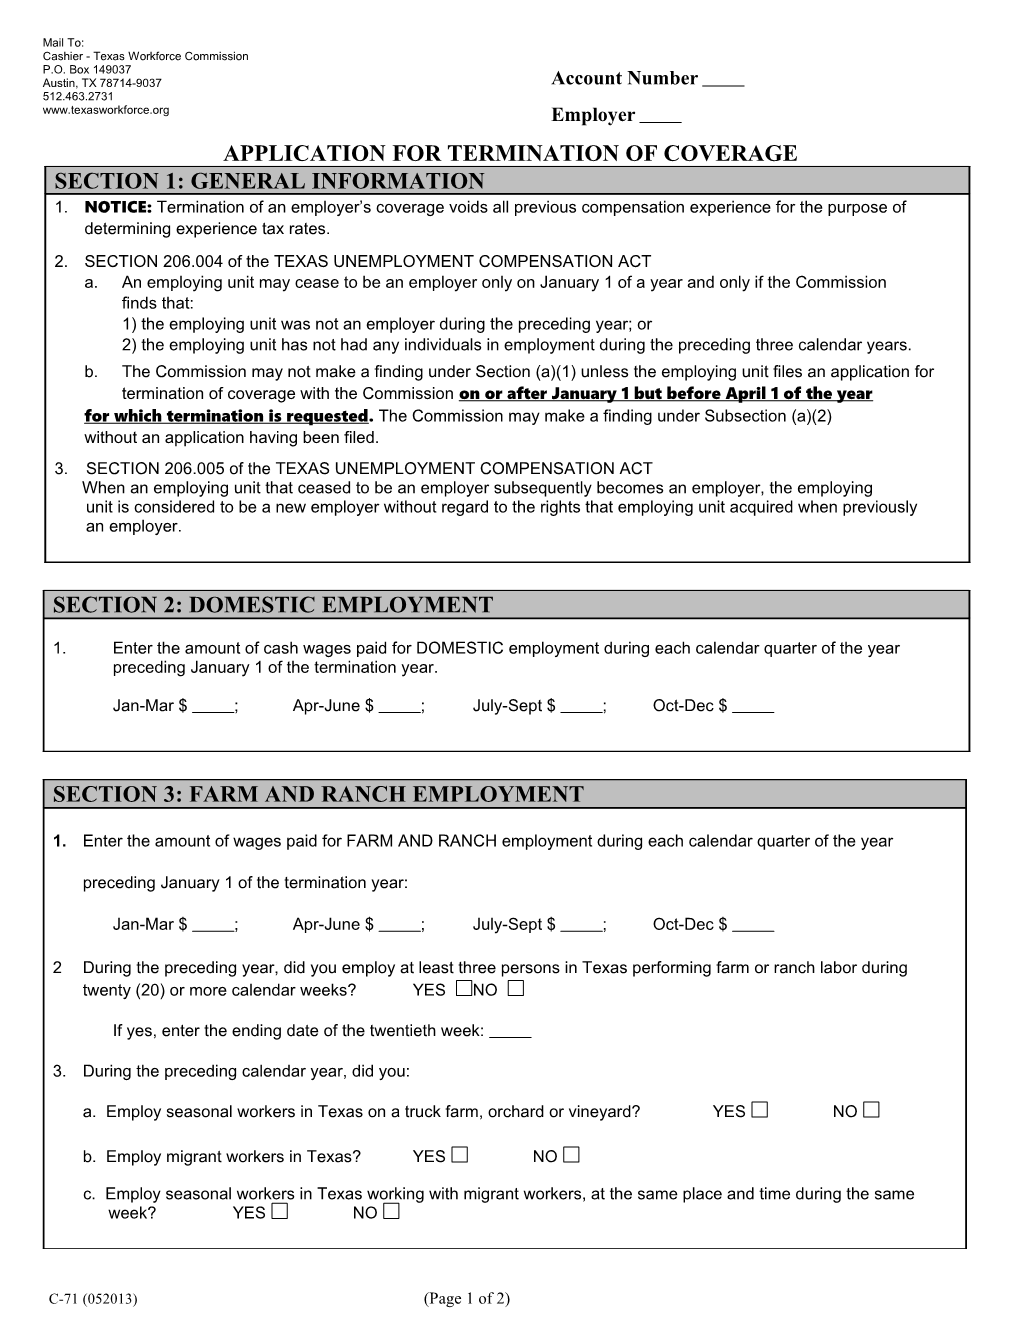 Form C-71: Application for Termination of Coverage